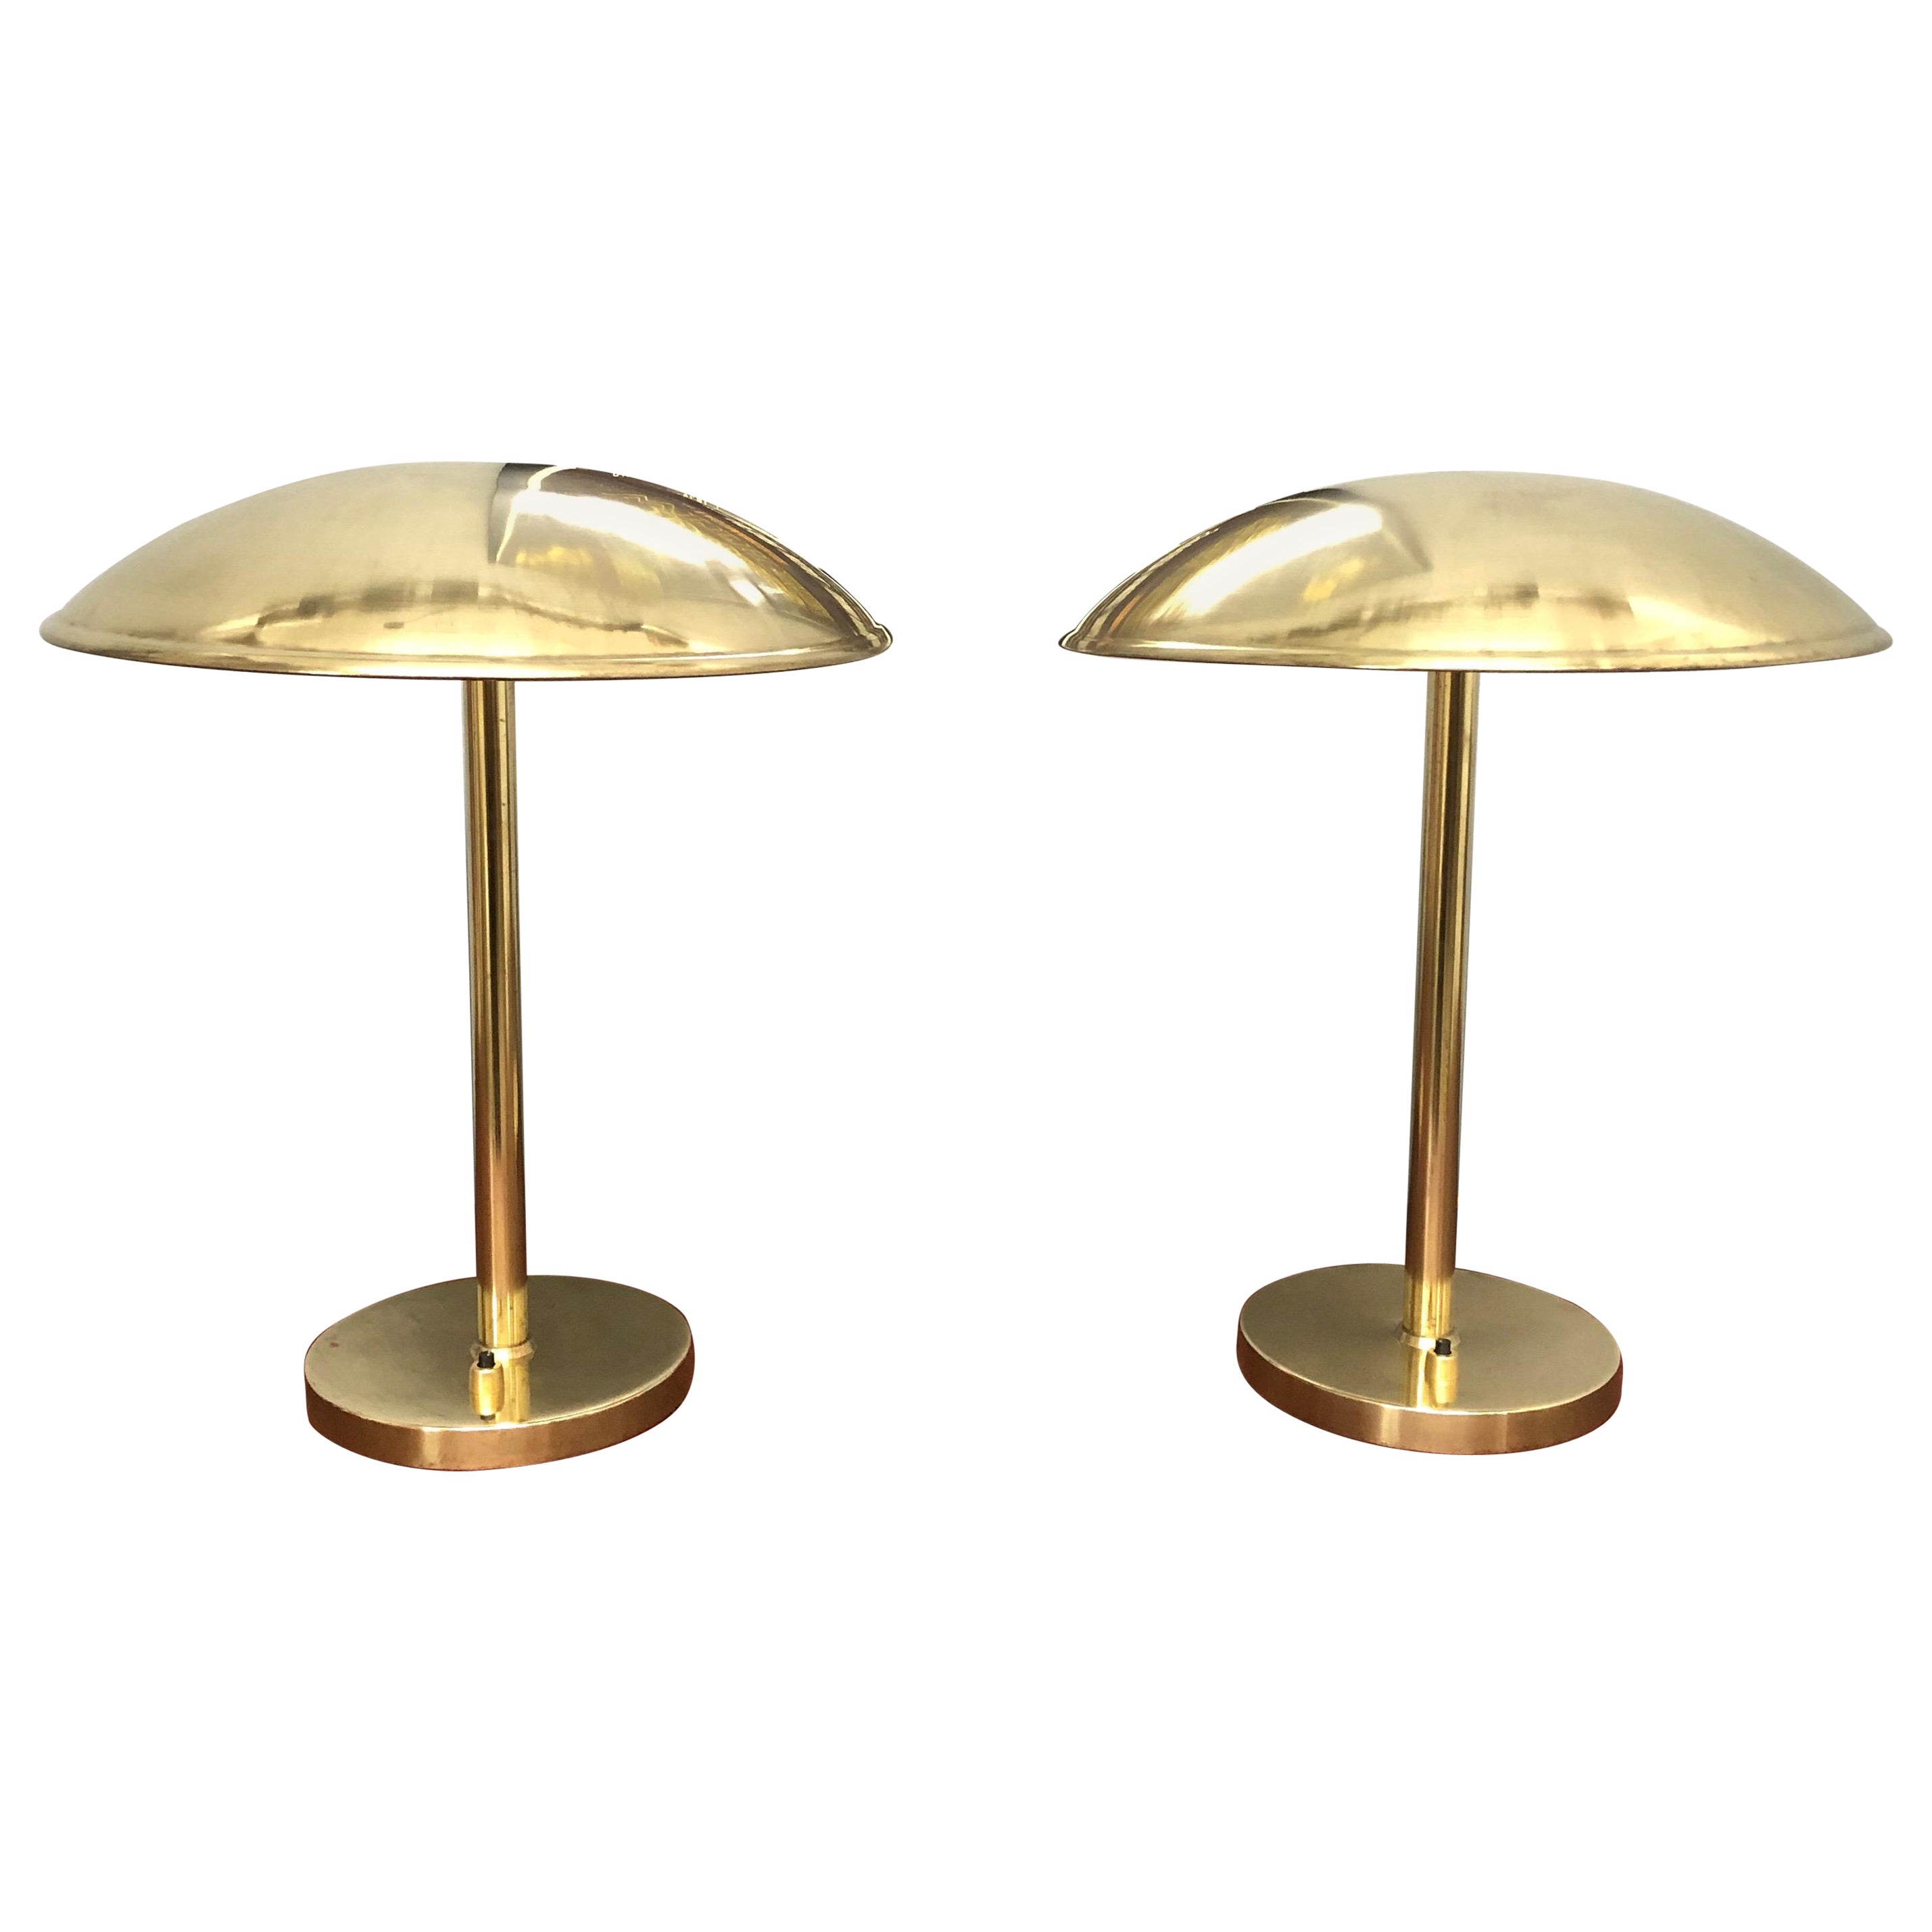 A Pair of Danish Modernist Table Lamp in Brass from the 1940s by Lyfa